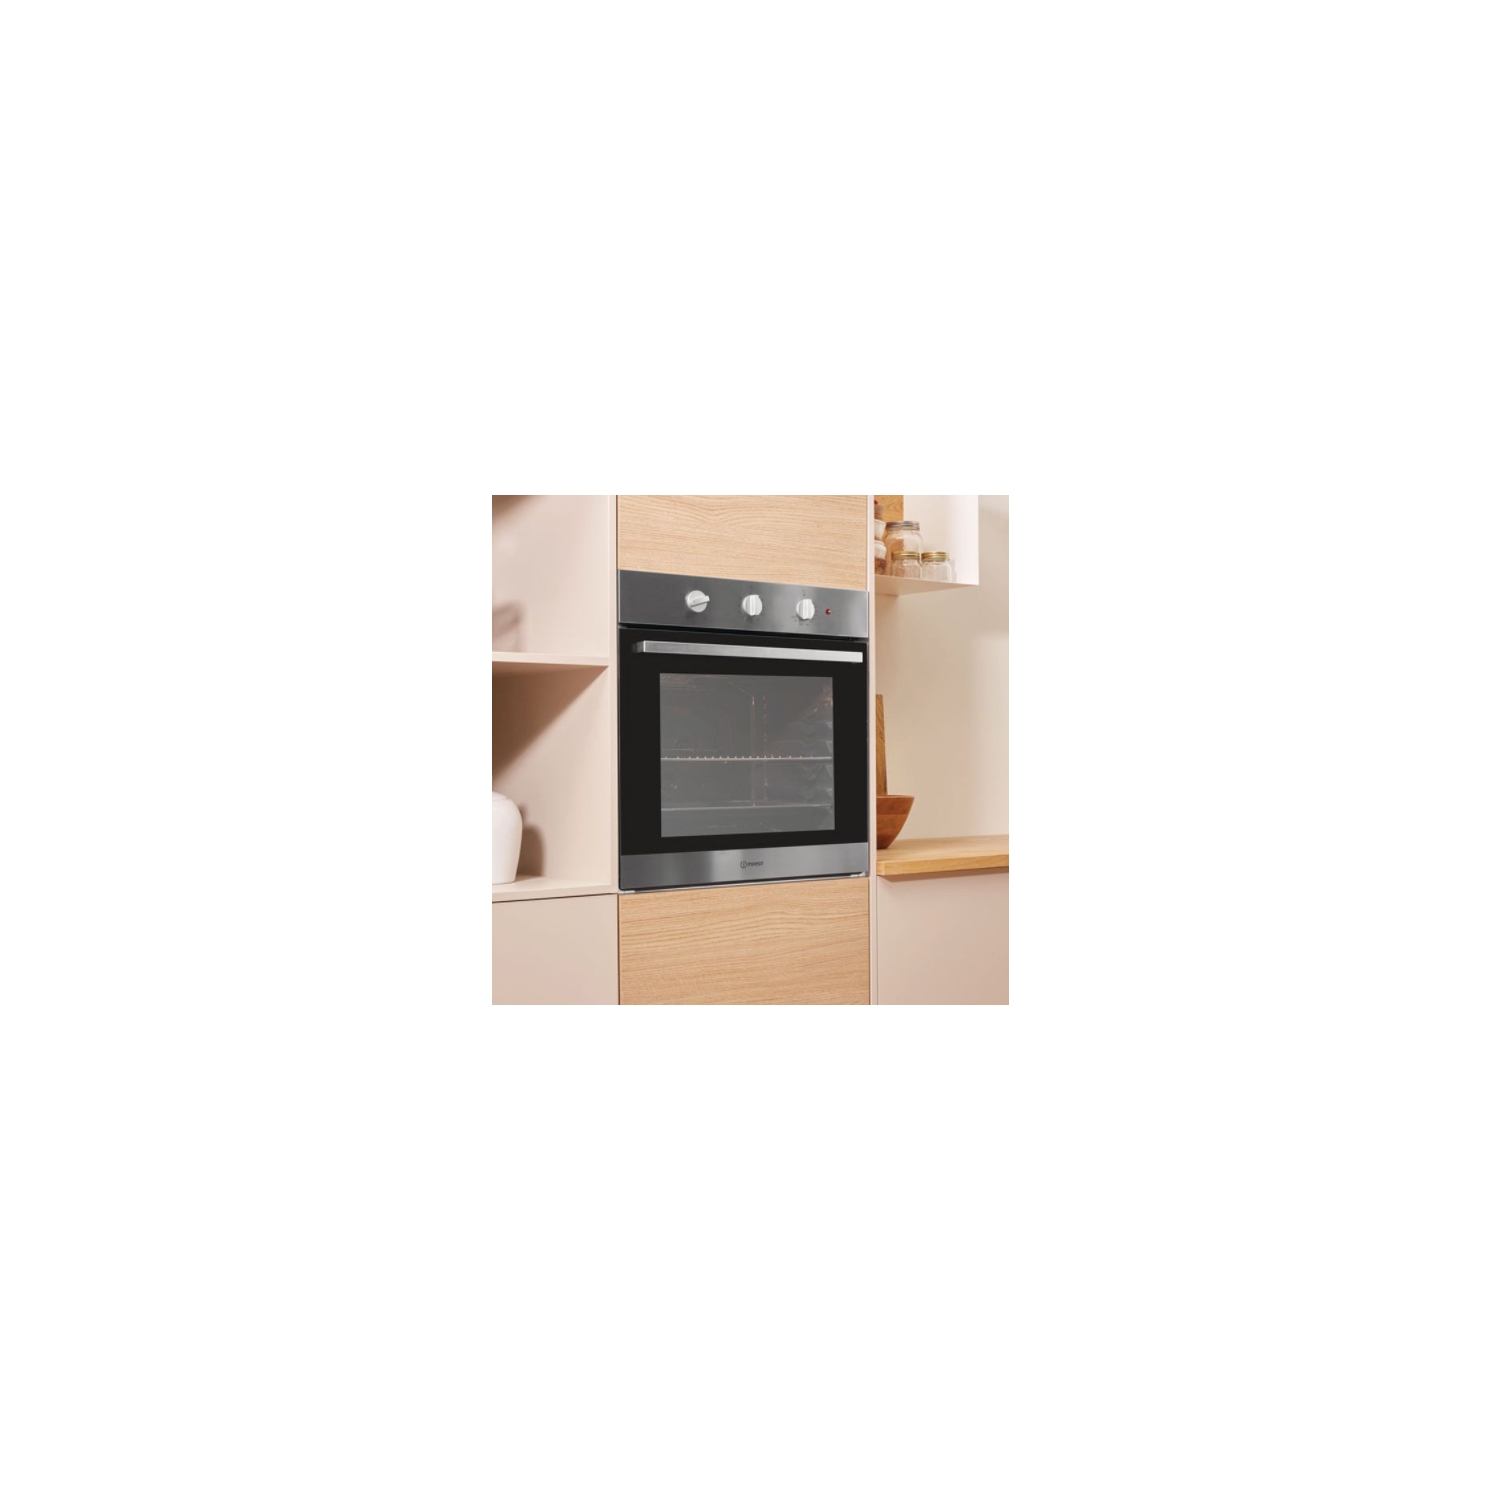 INDESIT IFW6230IXUK 59.5CM BUILT IN ELECTRIC SINGLE OVEN - STAINLESS STEEL - 2